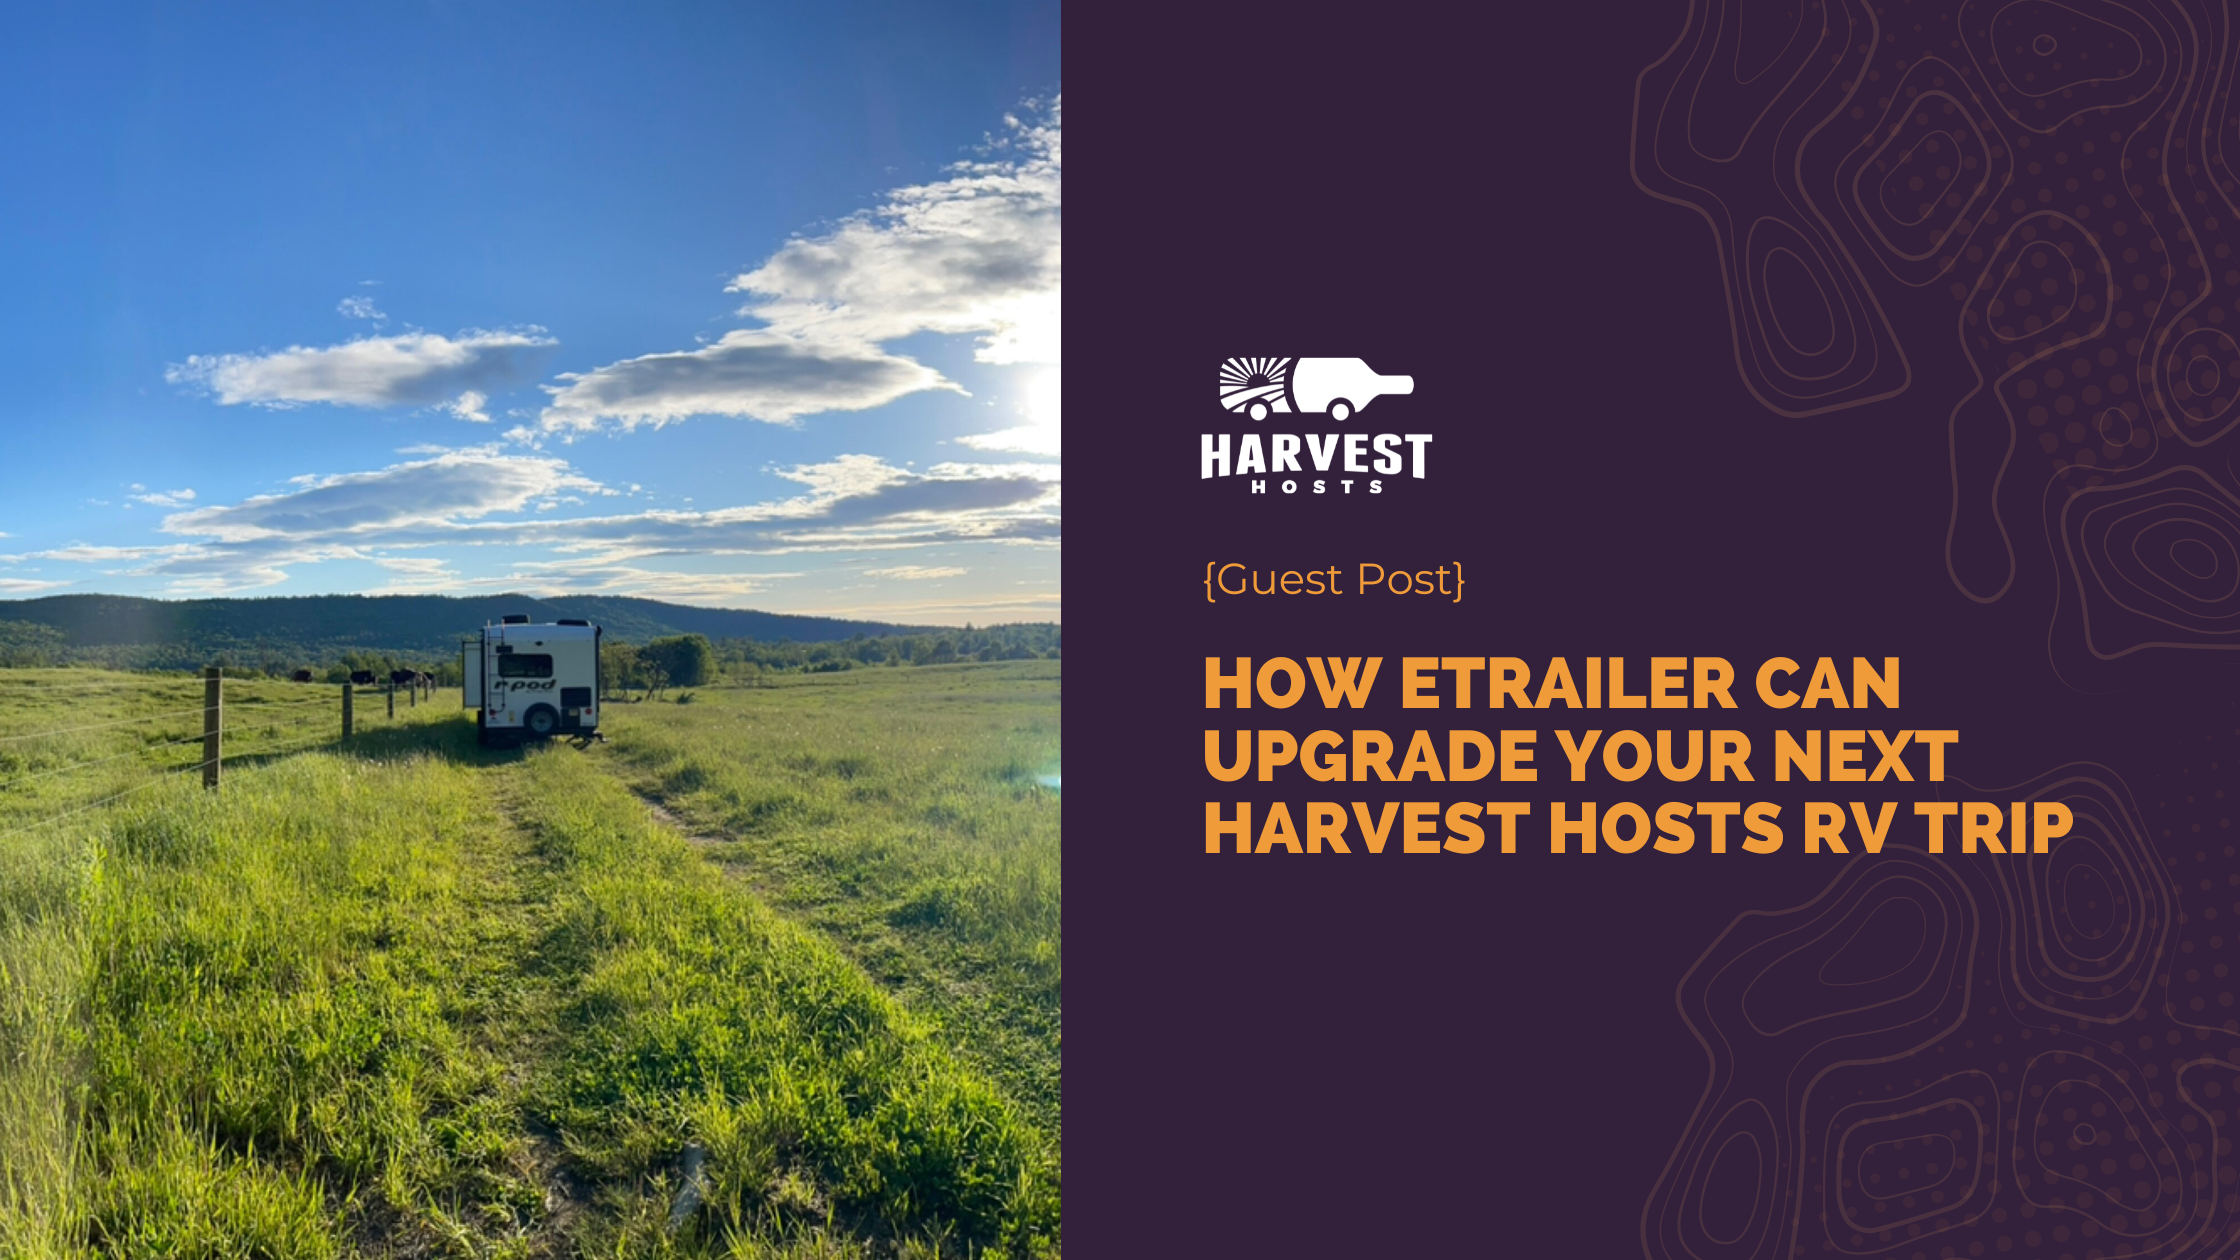 How etrailer Can Upgrade Your Next Harvest Hosts RV Trip